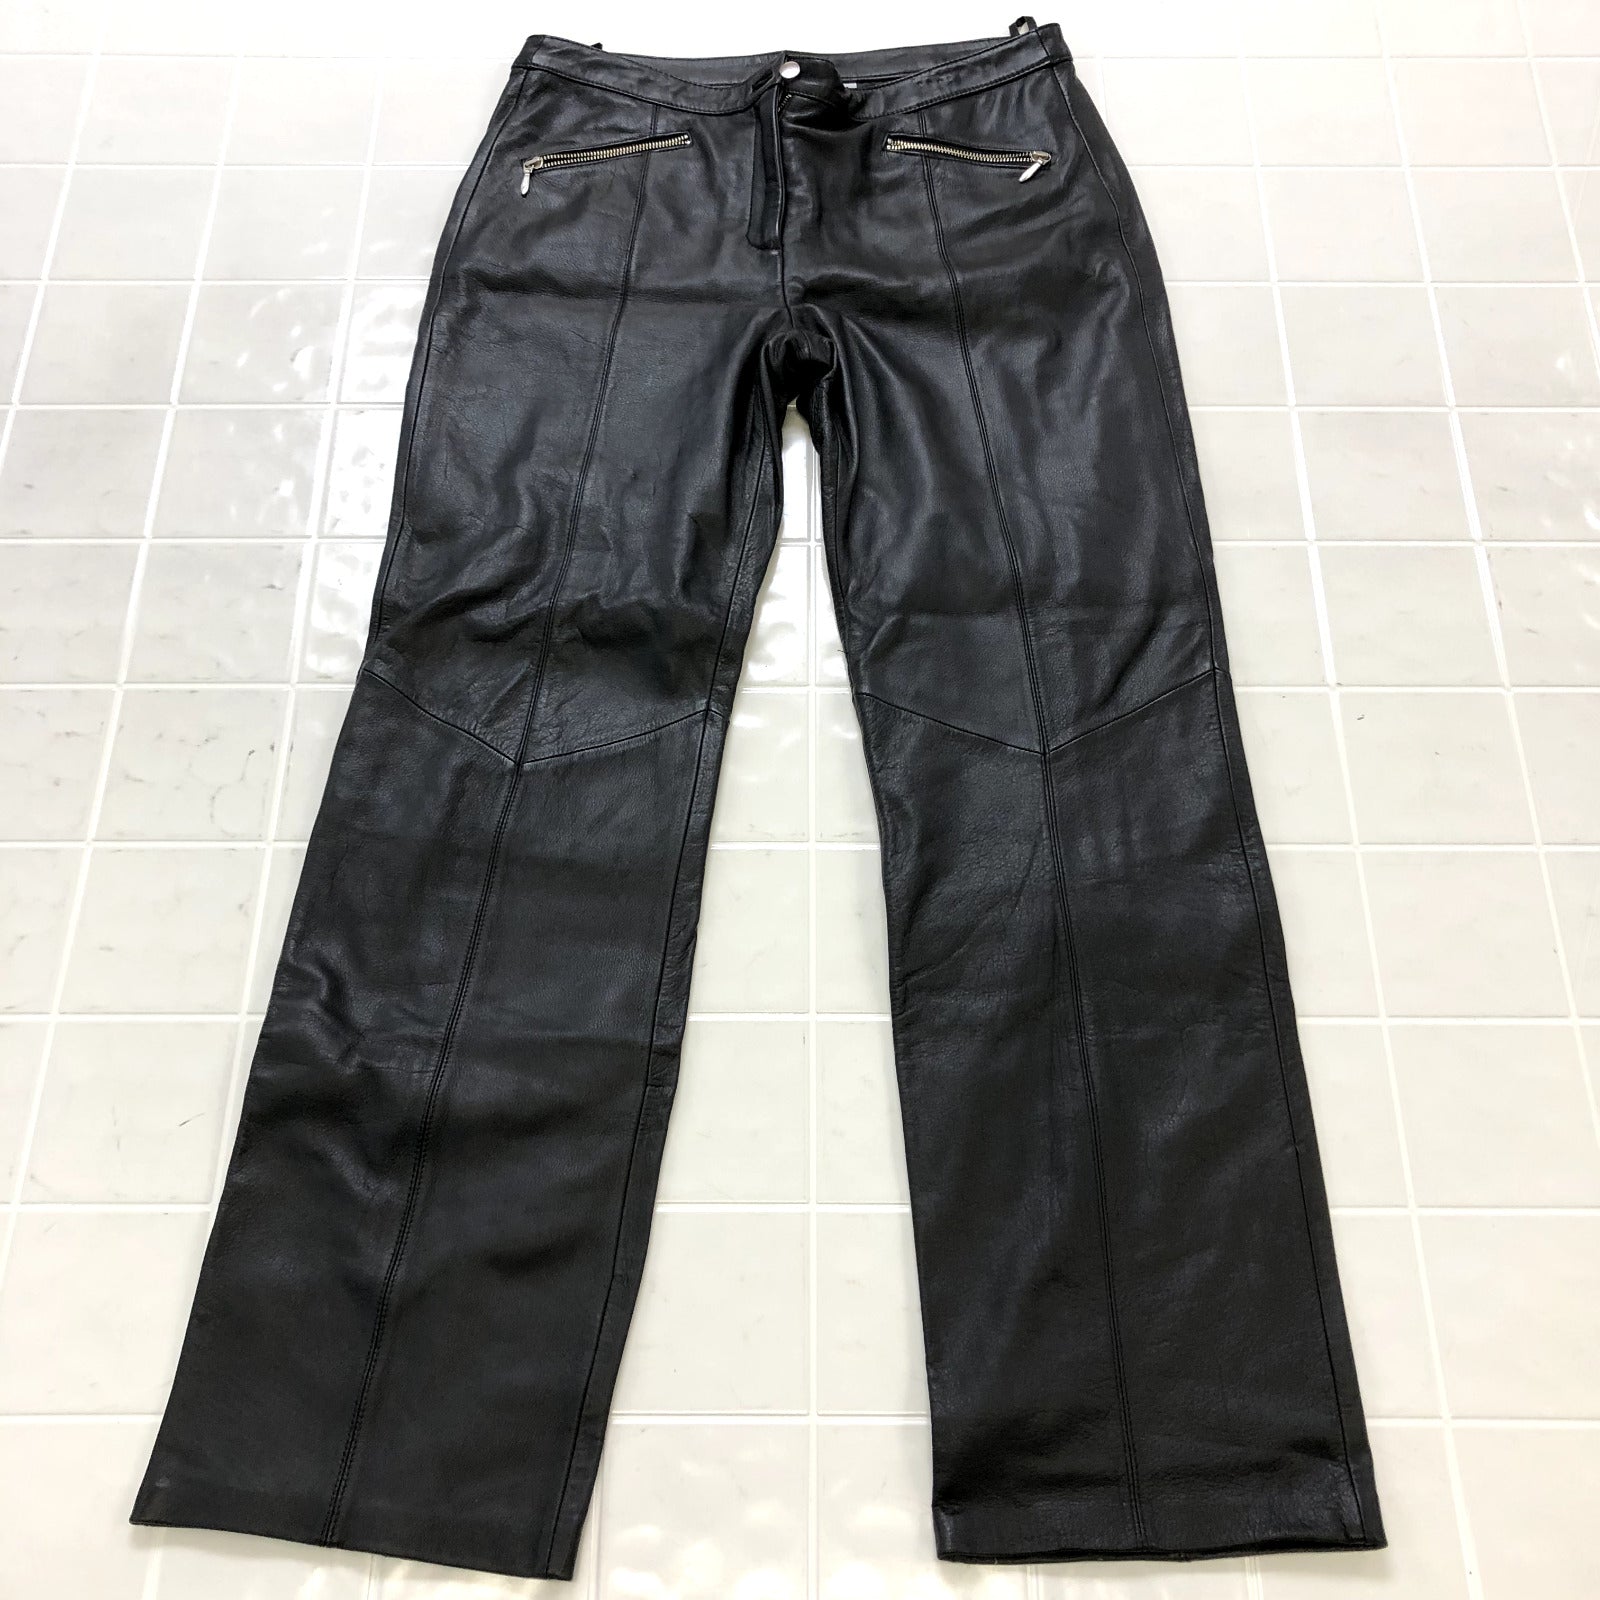 Retro Wilsons Leather Black Flat Front Straight Chino Leather Pants Women's 12